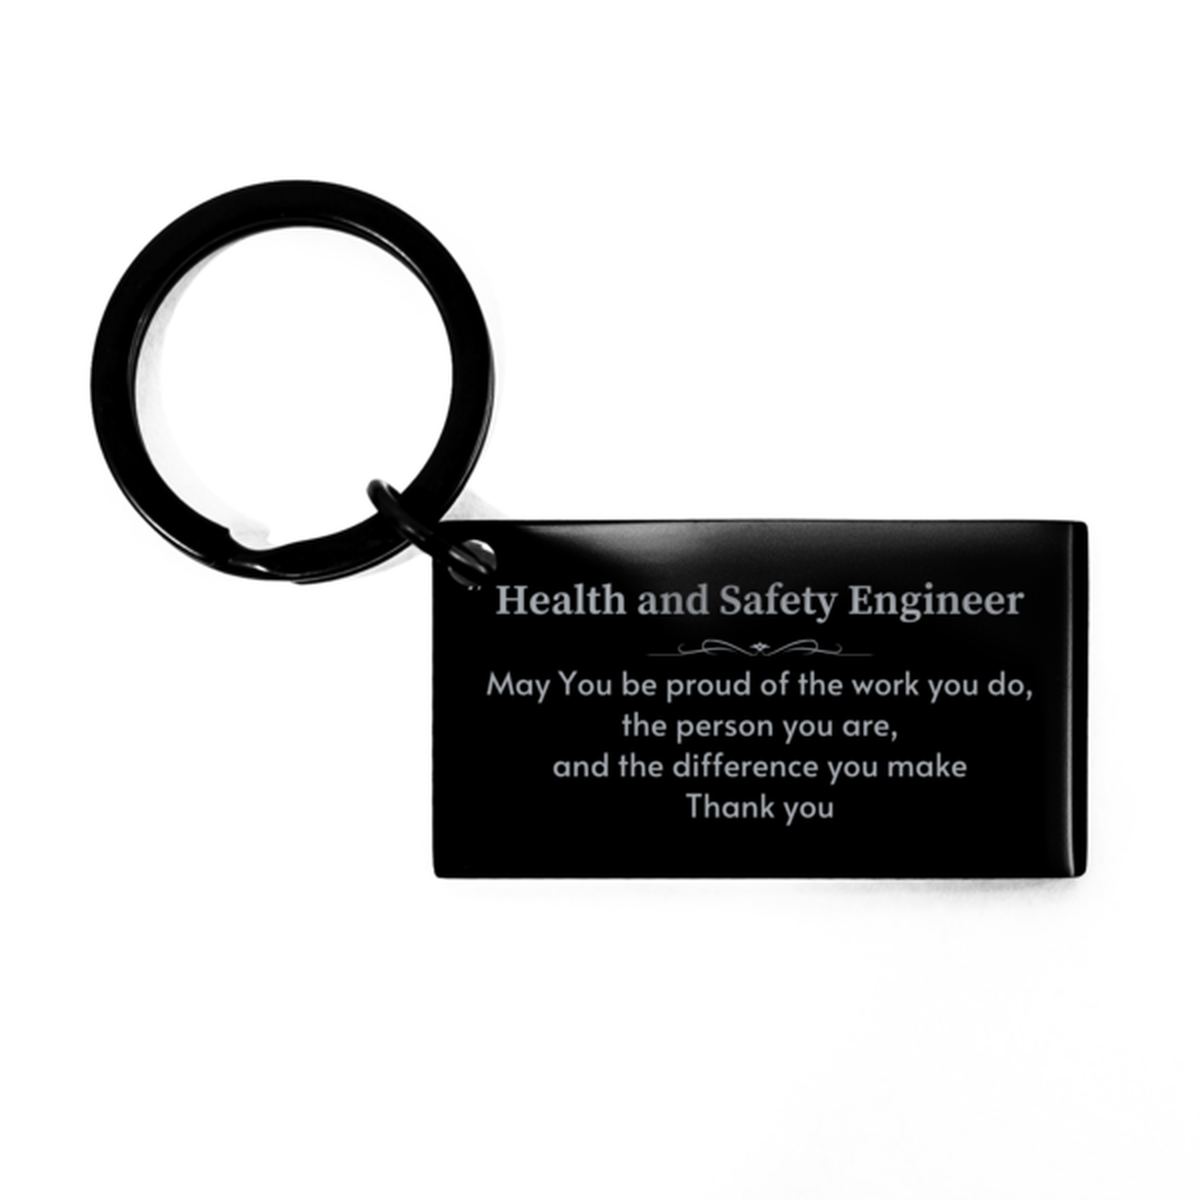 Heartwarming Keychain Retirement Coworkers Gifts for Health and Safety Engineer, Medical Assistant May You be proud of the work you do, the person you are Gifts for Boss Men Women Friends